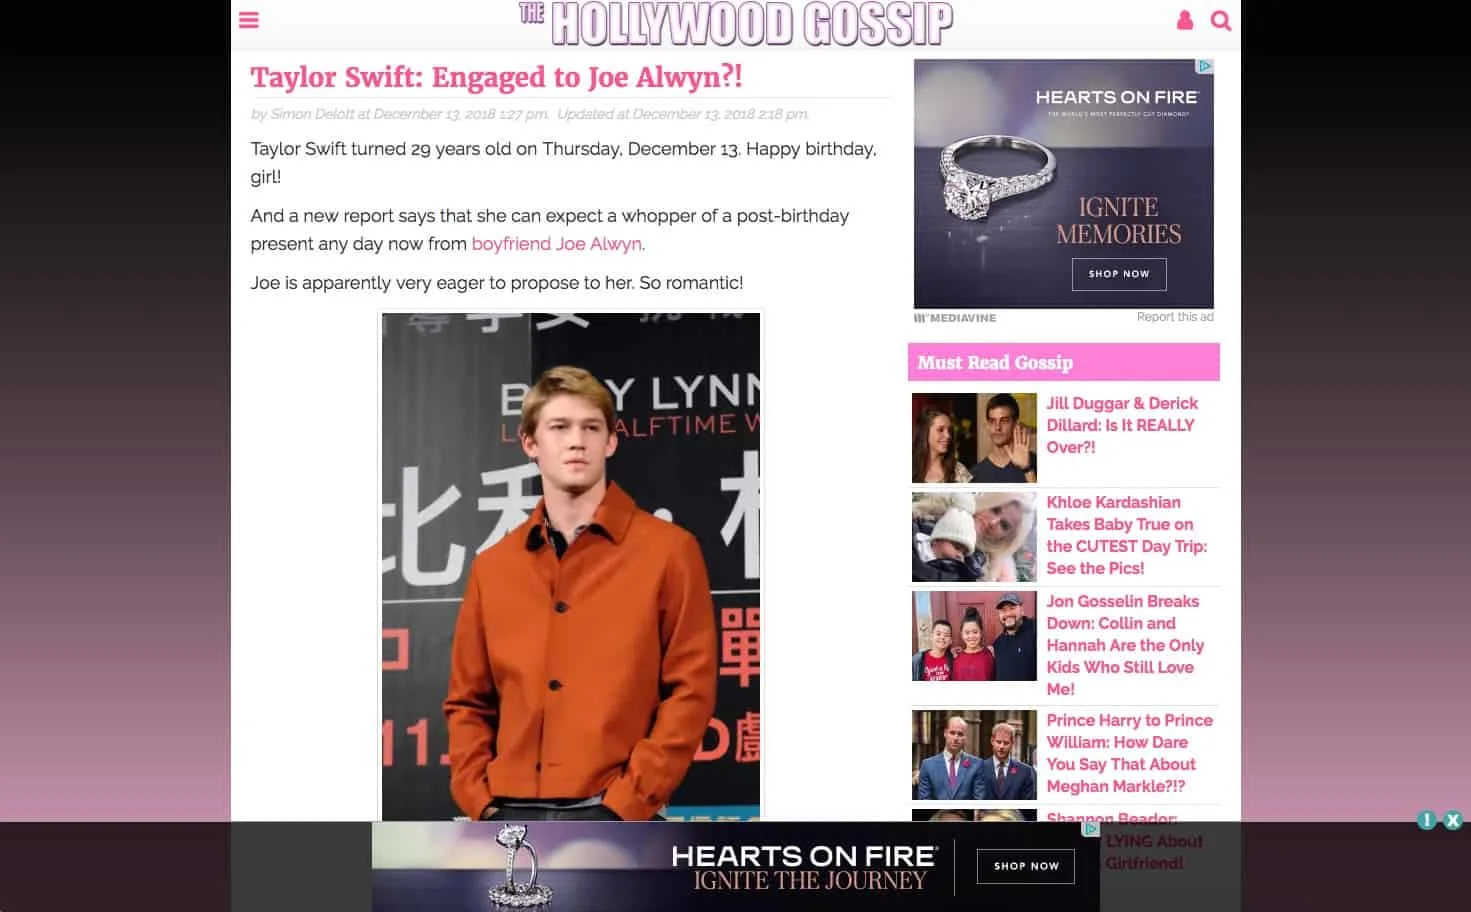 A screen capture of The Hollywood Gossip